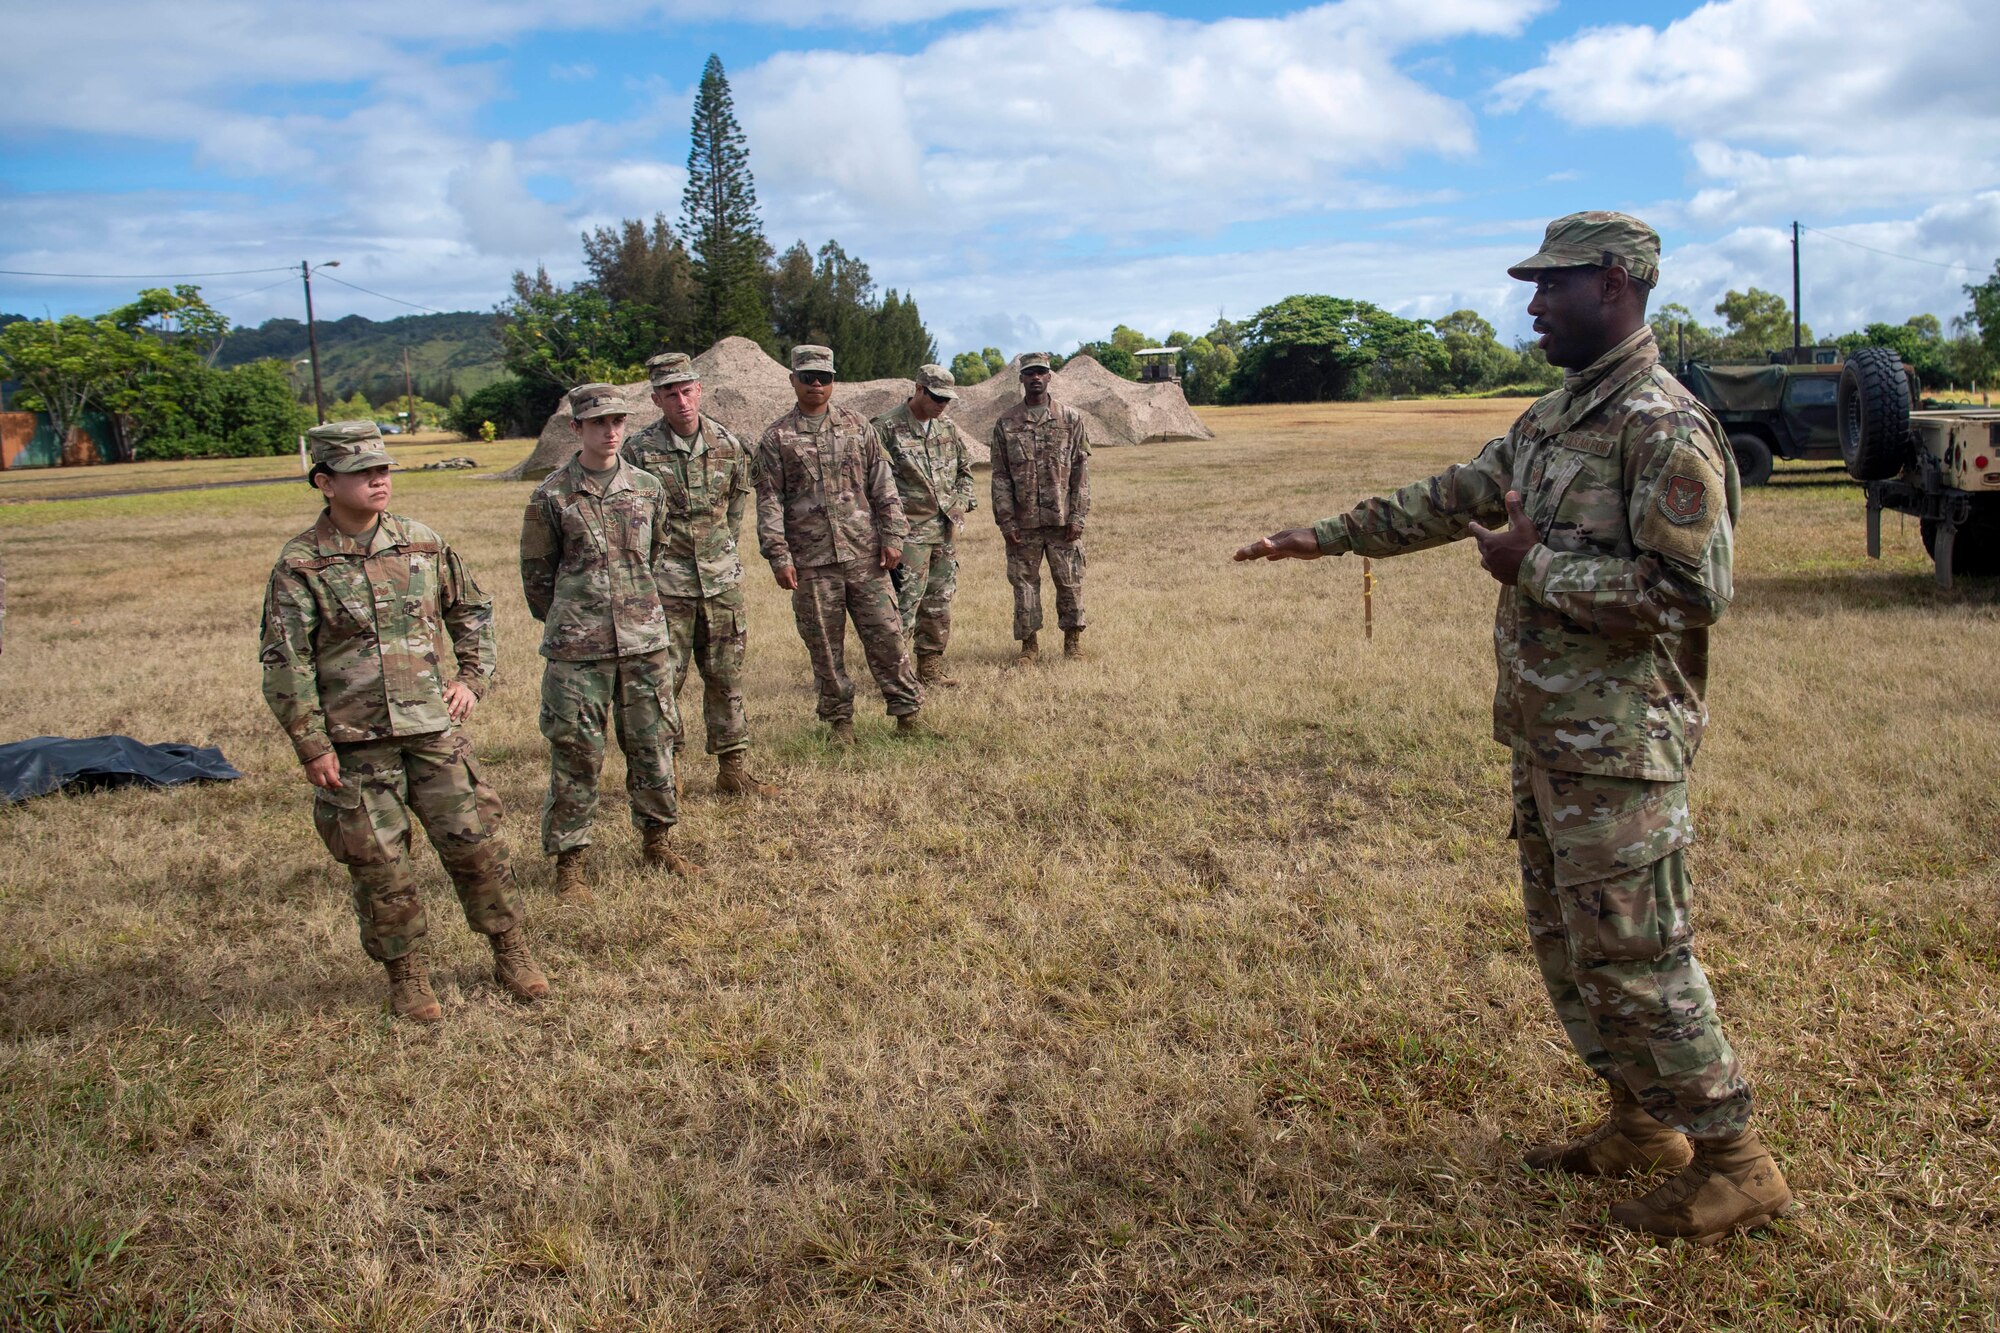 Tech Sgt. Reid Merriwether instructs Reserve Citizen Airmen from the 624th Regional Support Group on Search and Recovery (S&R) procedures during Pacific Warriorz 2021 (PWZ-21). PWZ-21 is a Total Force Integration and Joint Training exercise at Schofield Barracks, Hawaii June 12, 2021.